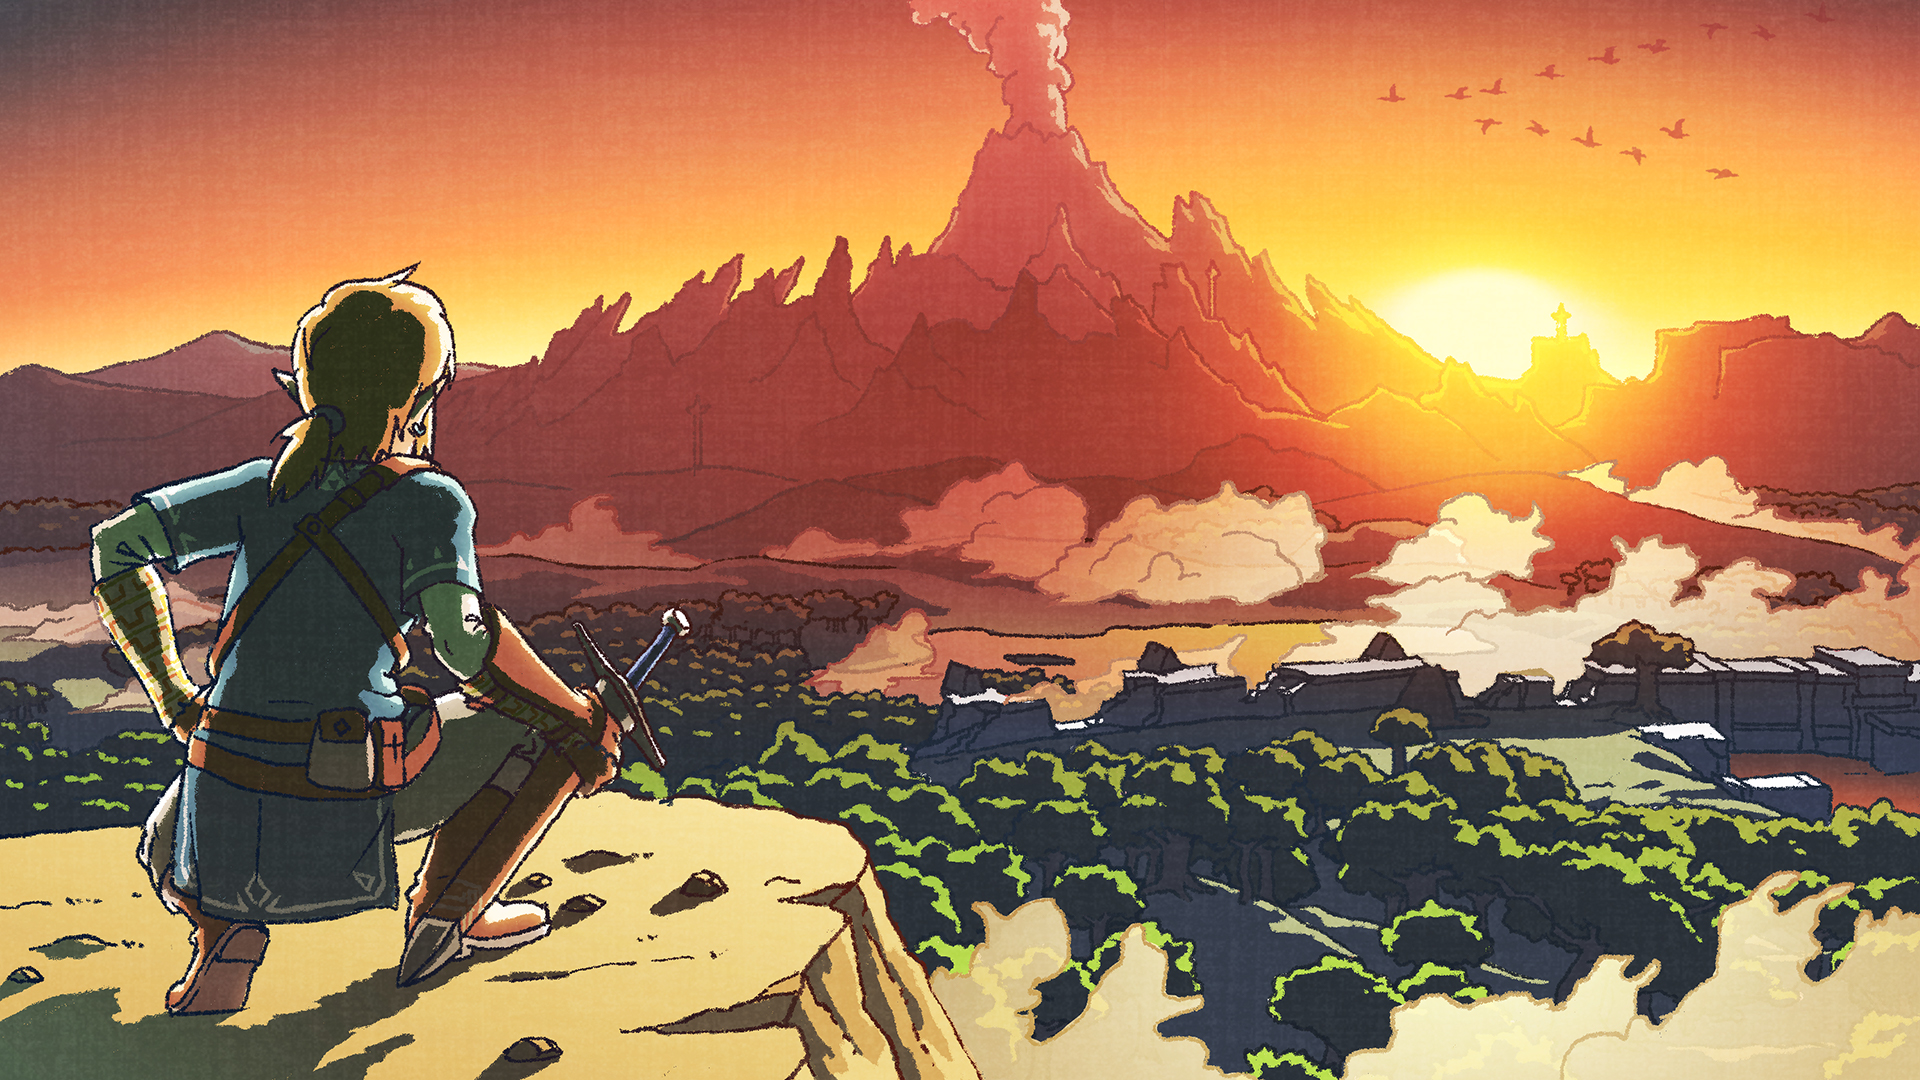 Anime 1920x1080 Link The Legend of Zelda The Legend of Zelda: Breath of the Wild drawing video game characters